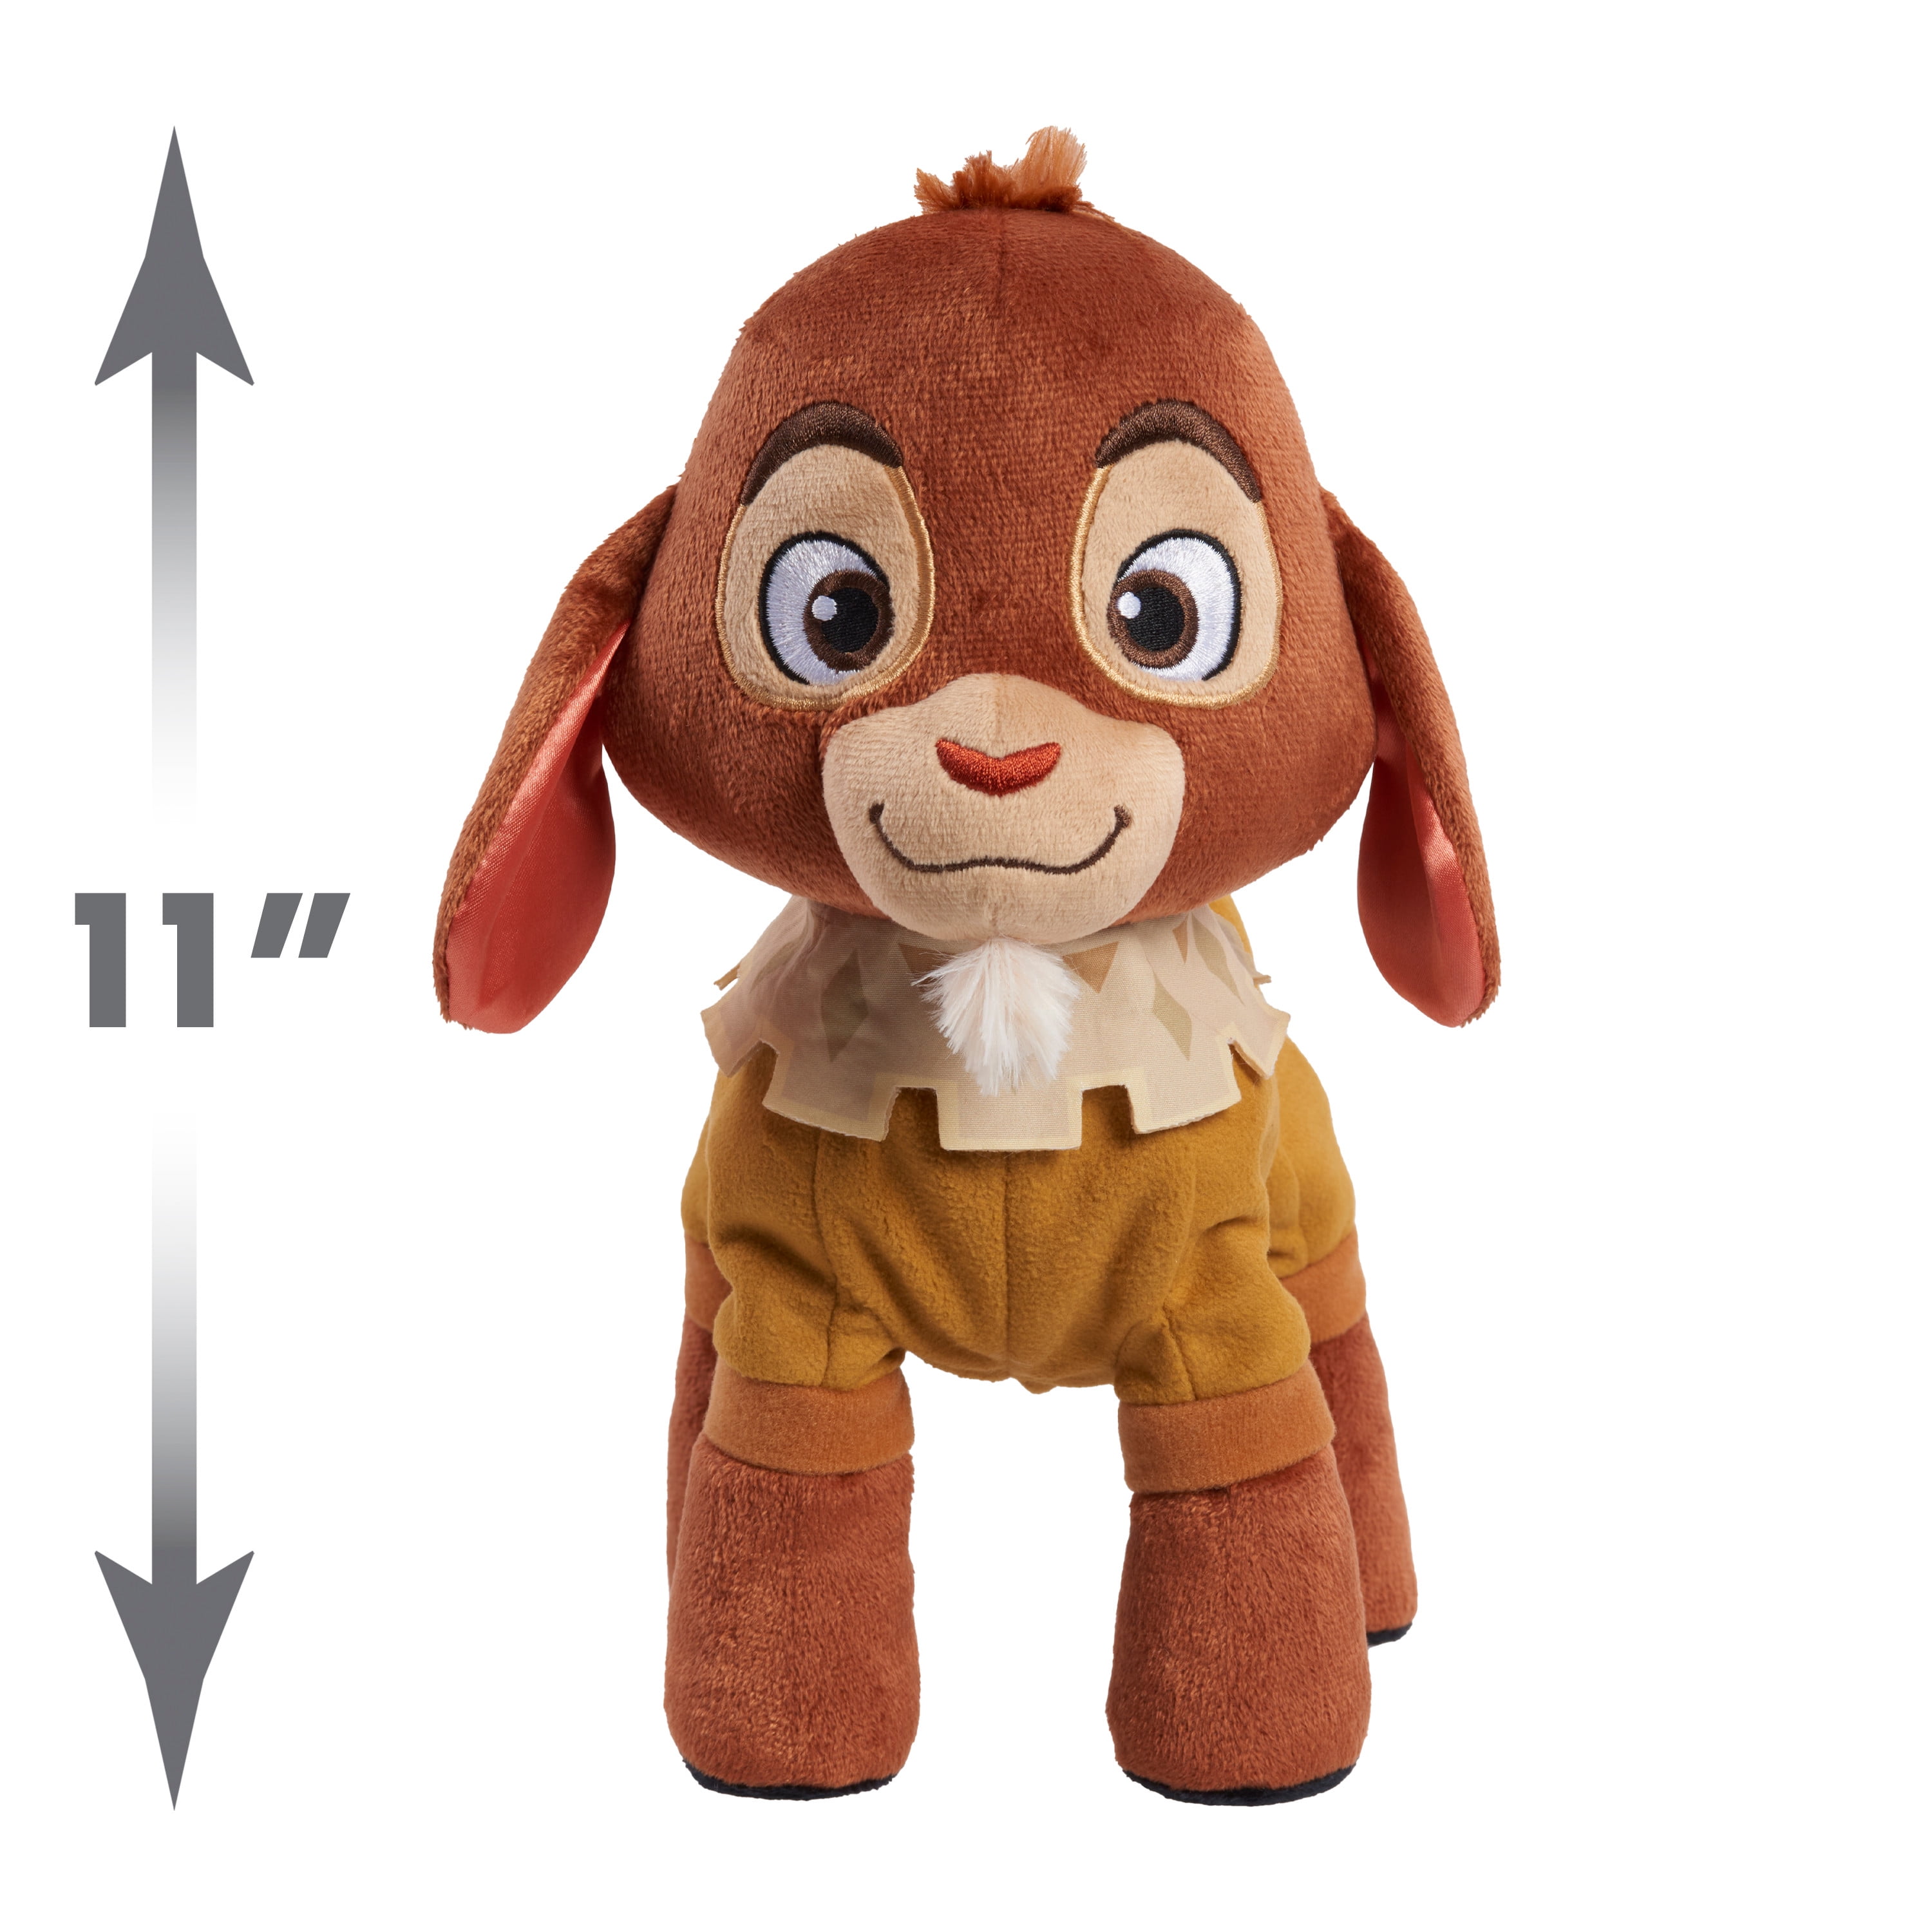 Disney Store Official Valentino Plush from 'Wish' Series - Soft & Cuddly  13-Inch Toy - Premium Collectible for Wish Enthusiasts for All - Authentic